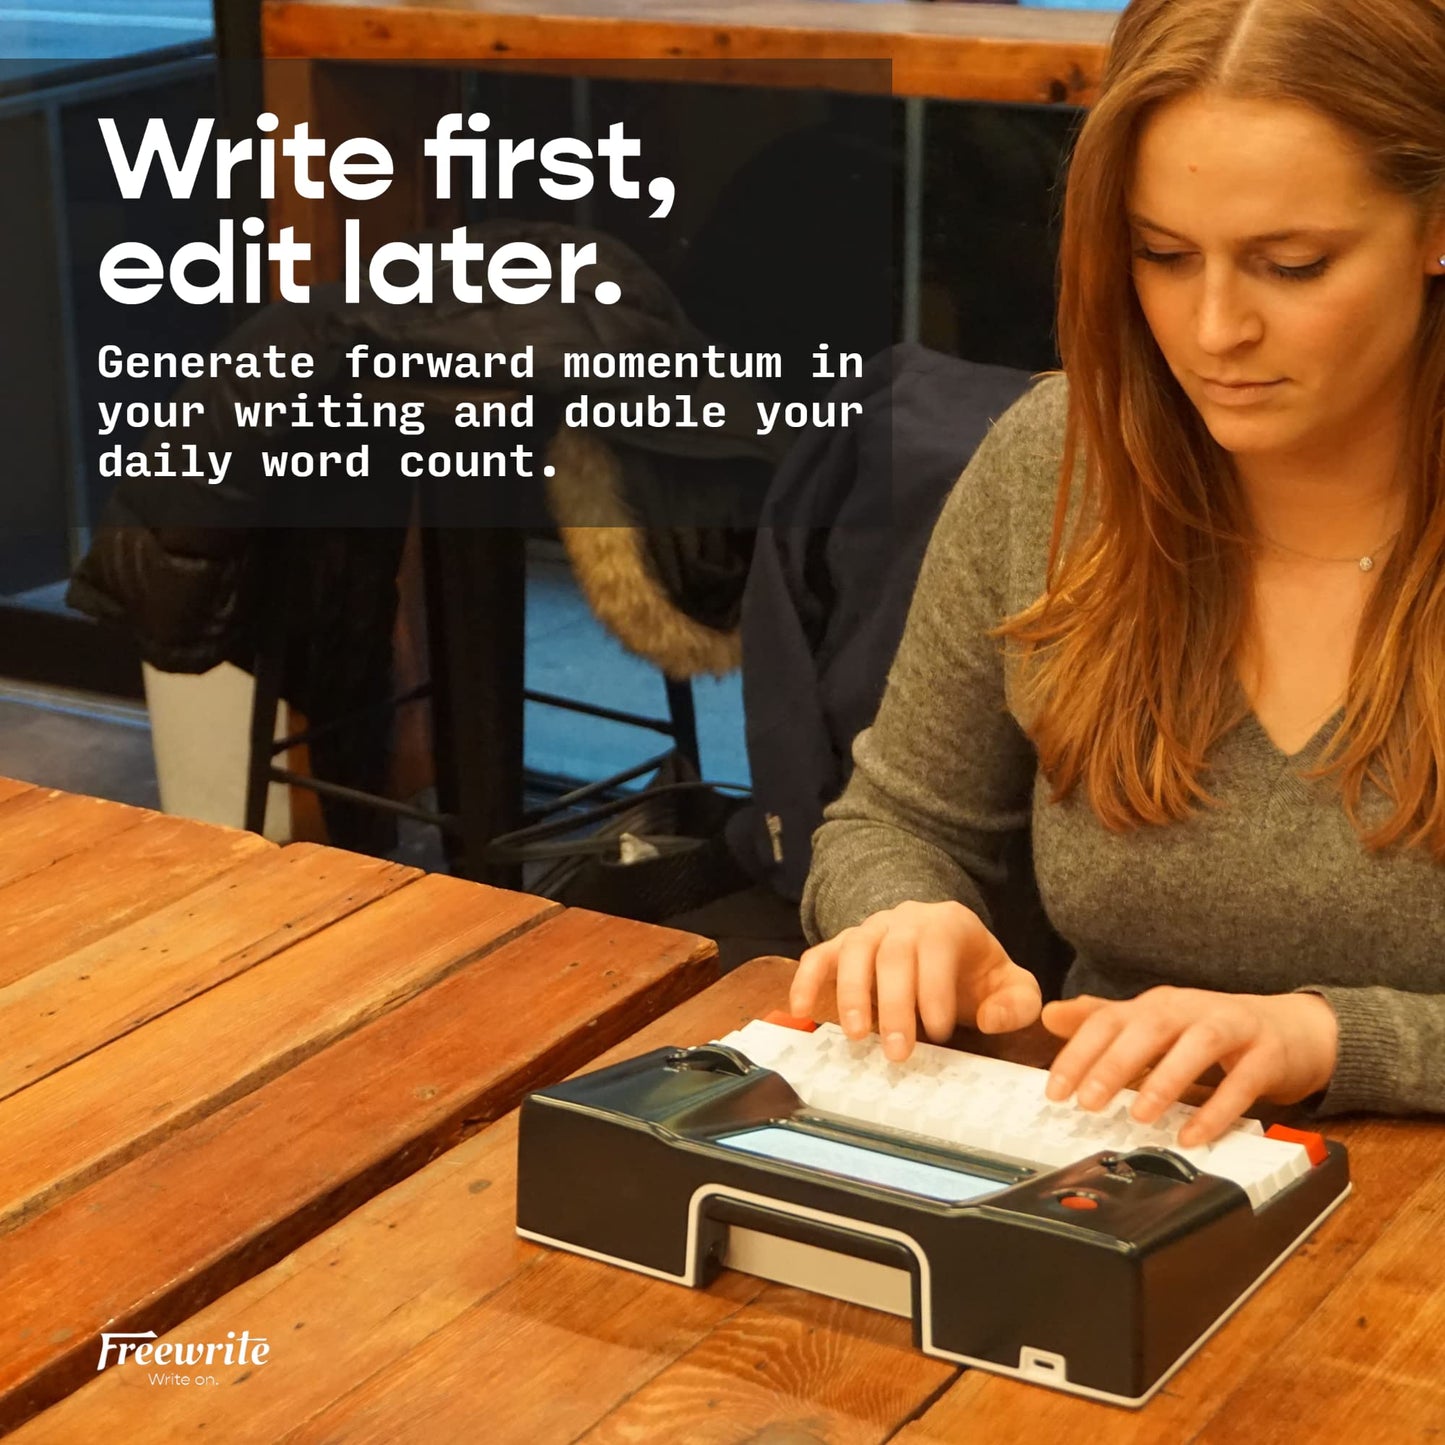 Freewrite Smart Typewriter | Digital Typewriter with E Ink Display for Distraction-Free Writing | WiFi-Enabled Word Processor Syncs Directly to The Cloud | Dedicated Drafting Machine for Authors